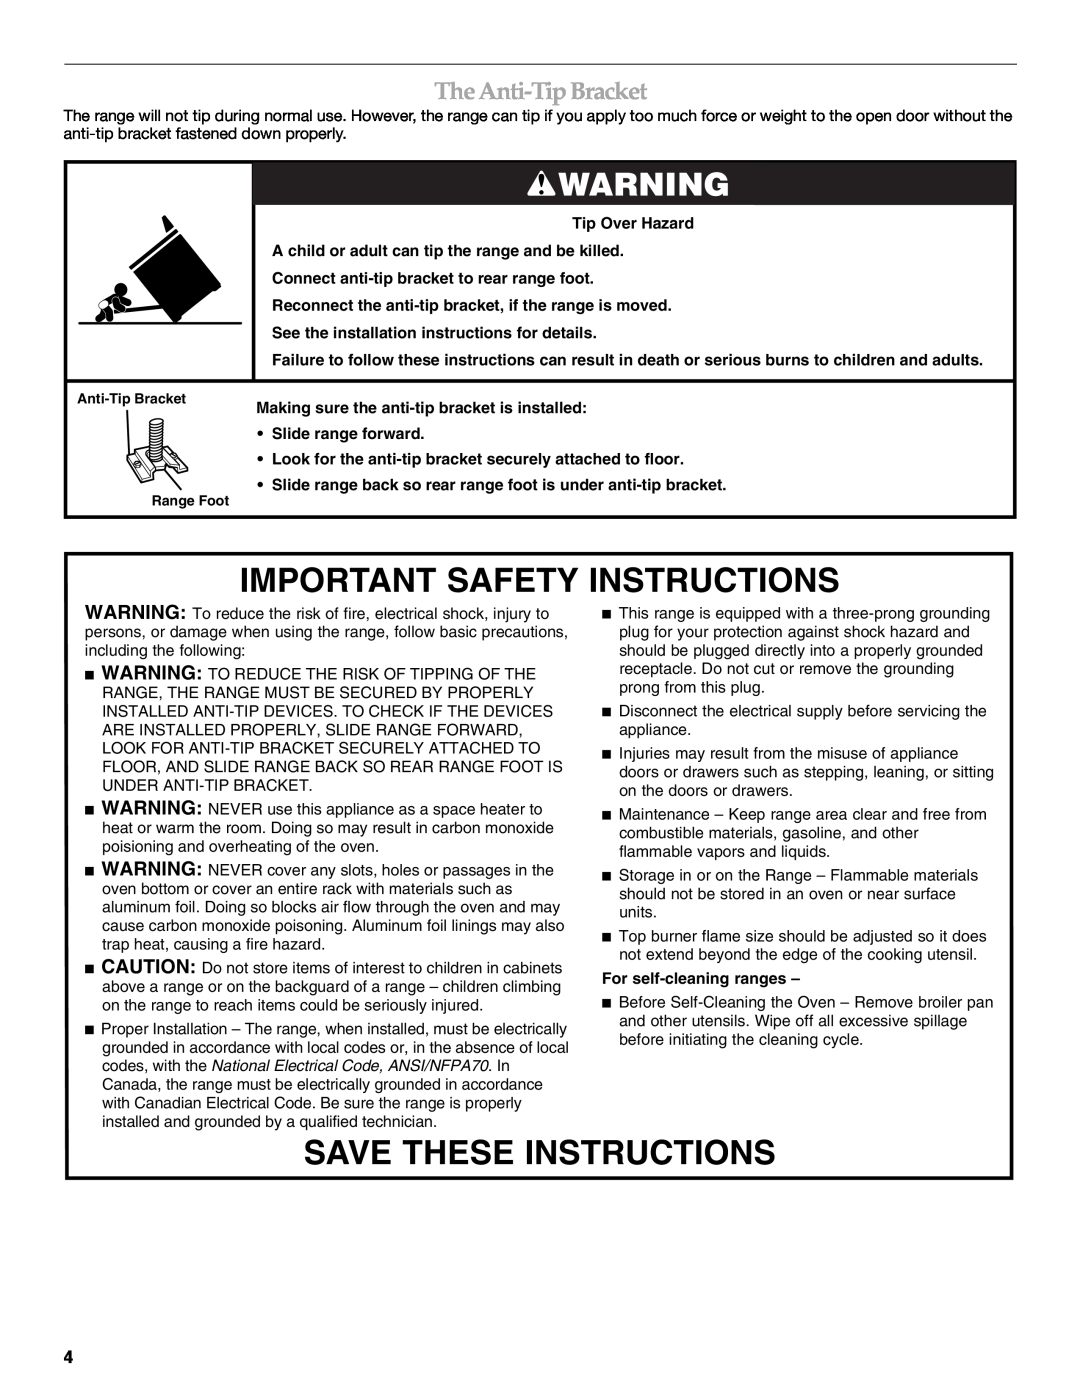 KitchenAid 9763457 Important Safety Instructions, Save These Instructions, The Anti-Tip Bracket, For self-cleaning ranges 